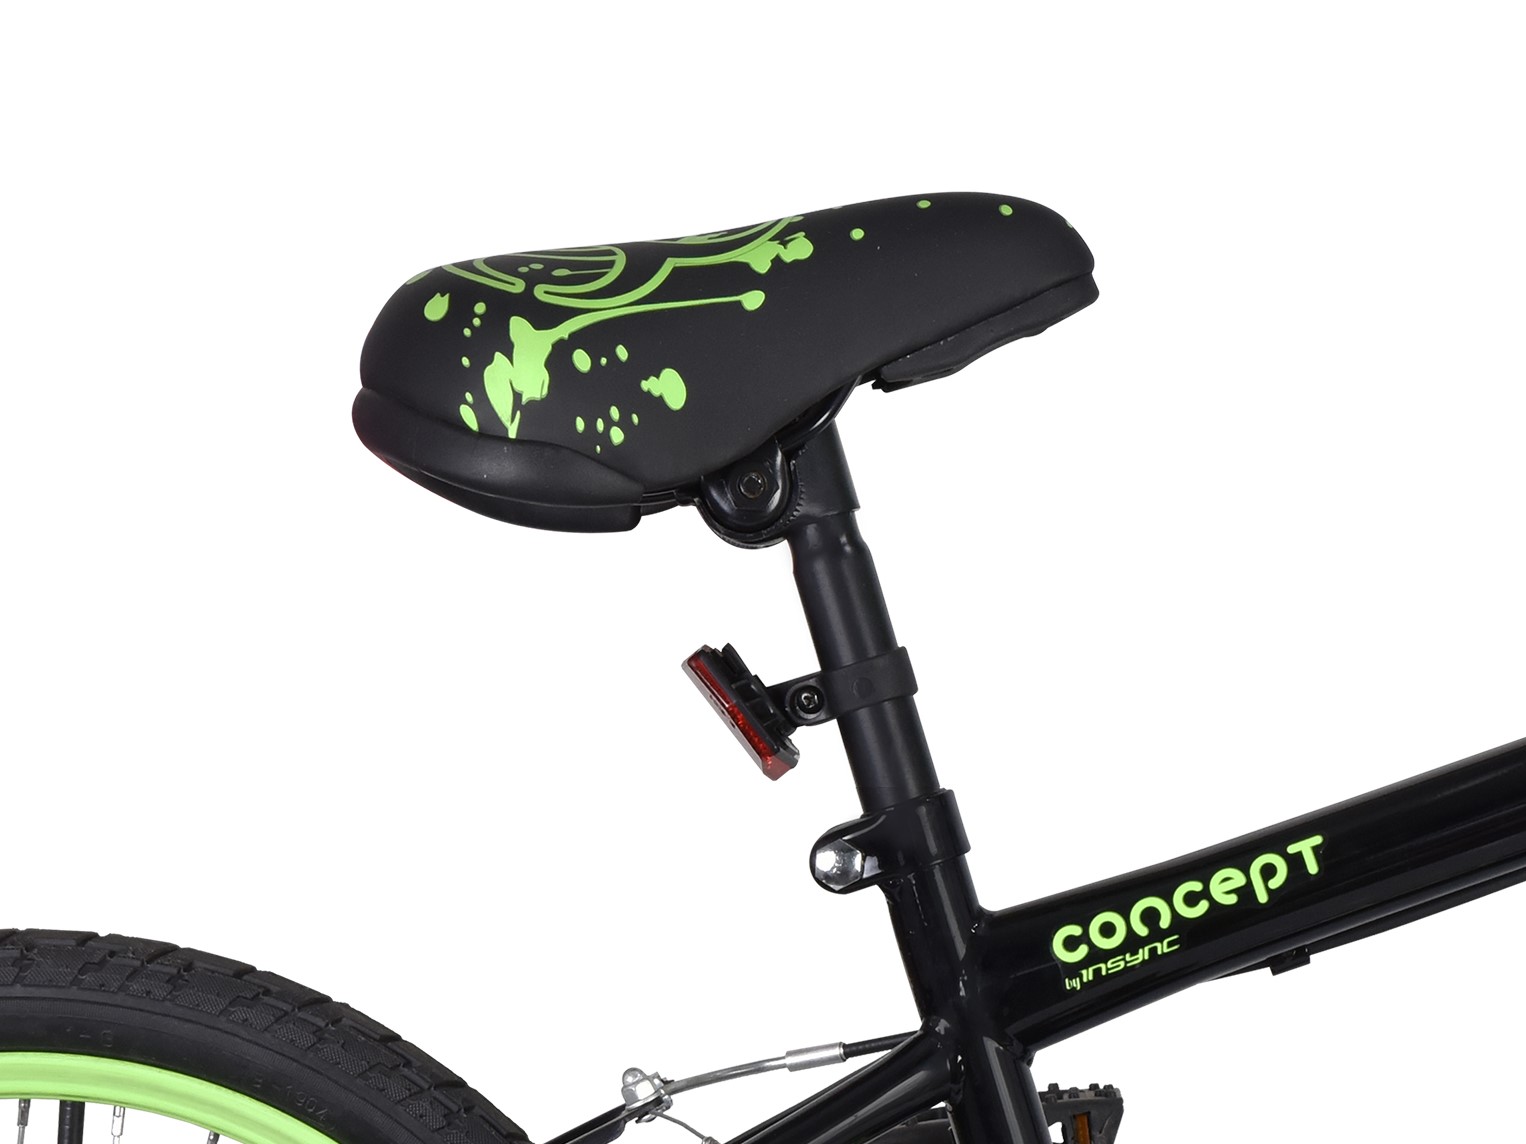 Avocet Sports Limited Concept Zombie 18 Wheel Boys Bicycle